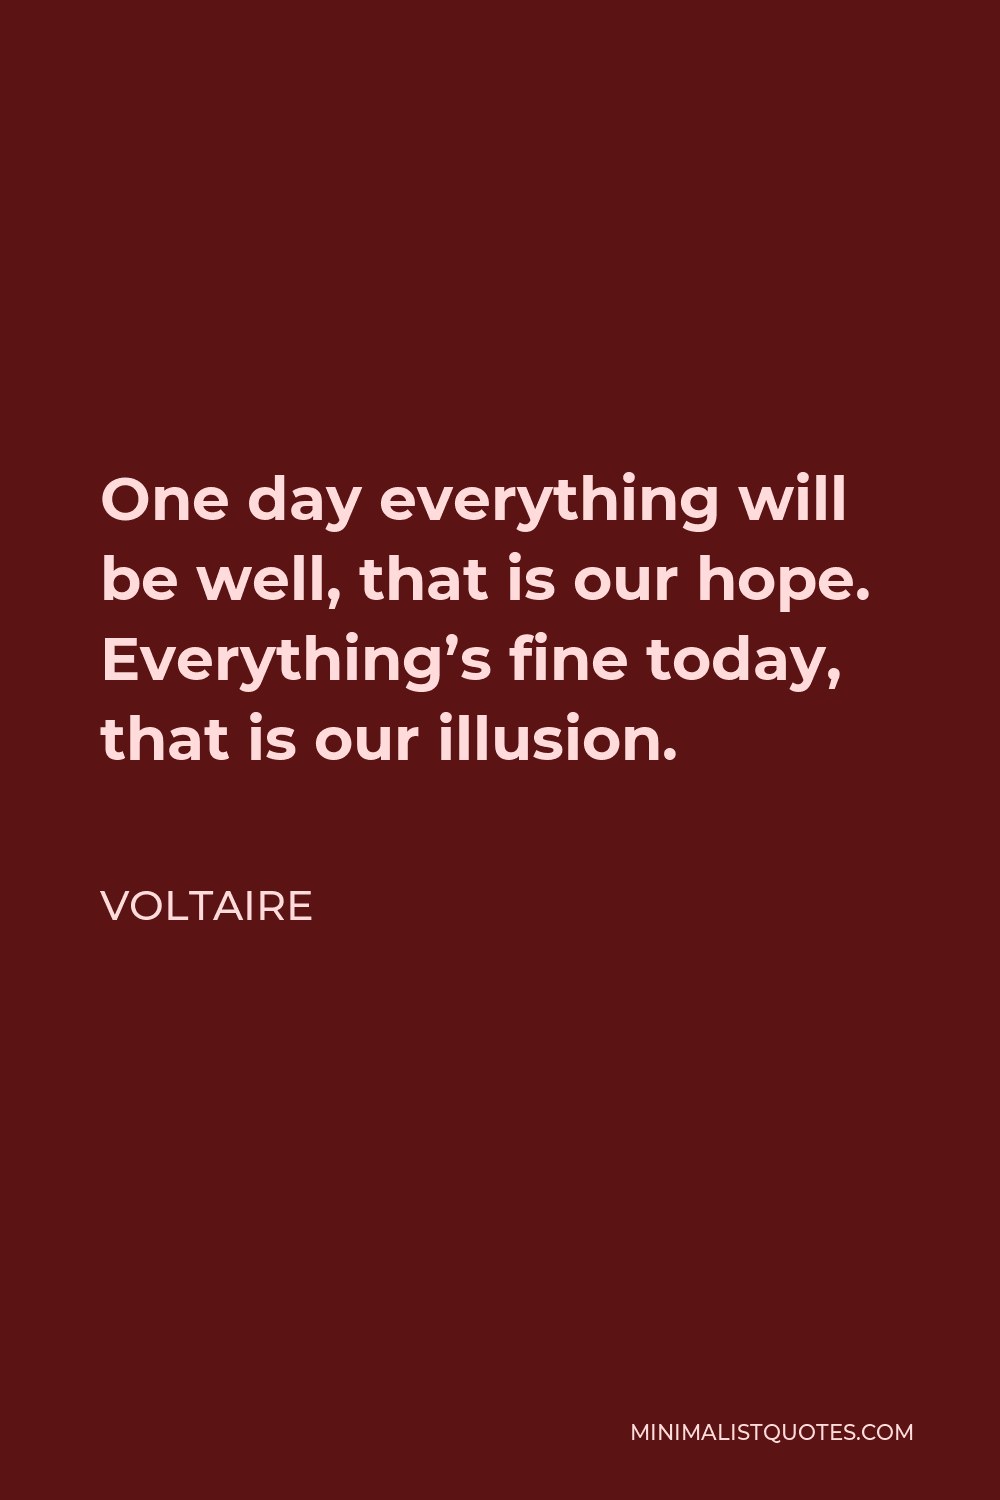 Voltaire Quote - One day everything will be well, that is our hope. Everything’s fine today, that is our illusion.